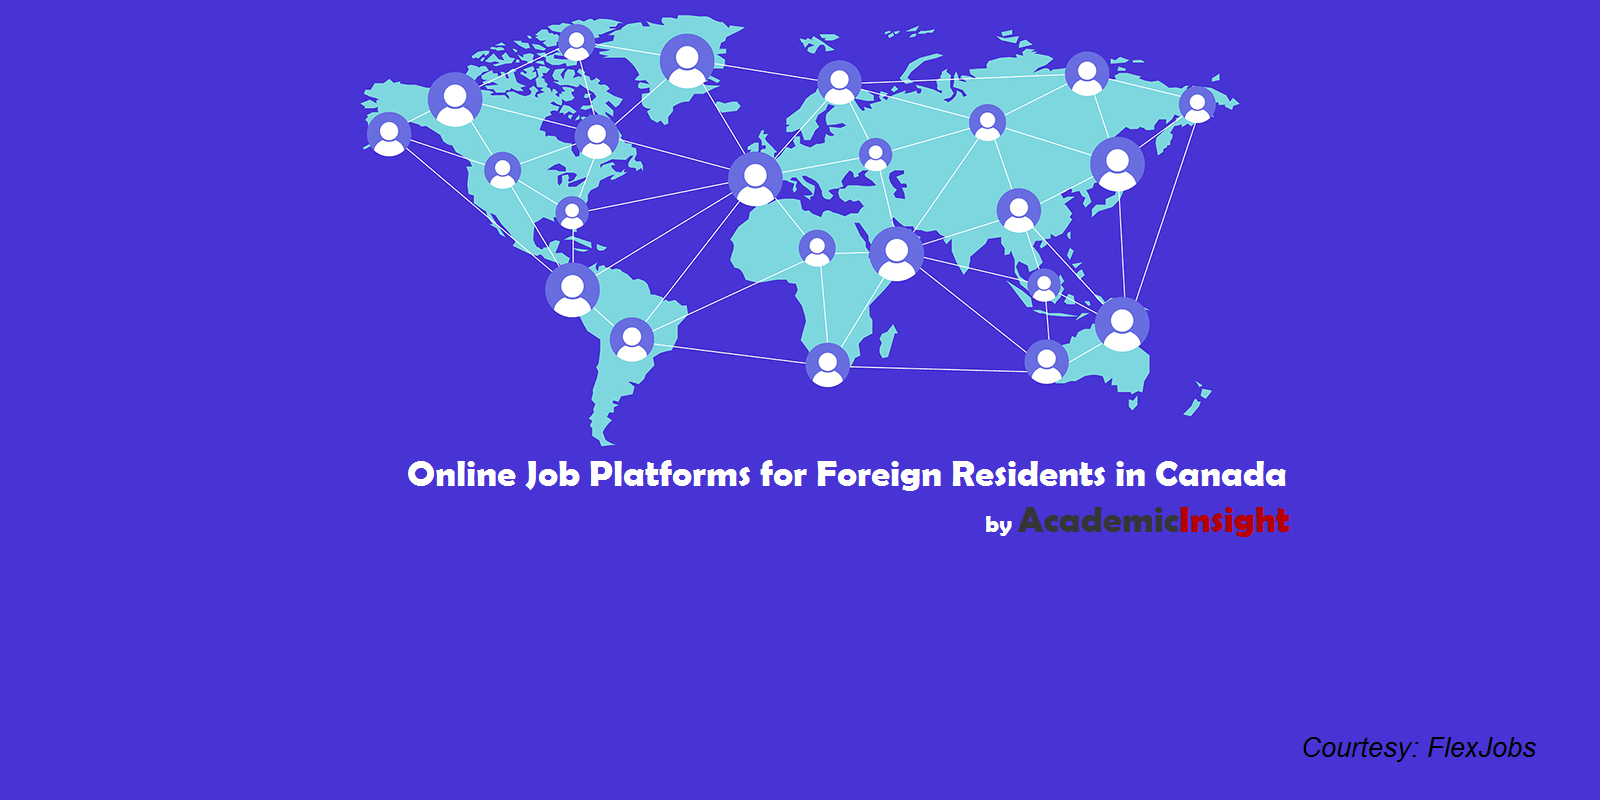 Online Job Platforms for foreign residents in Canada